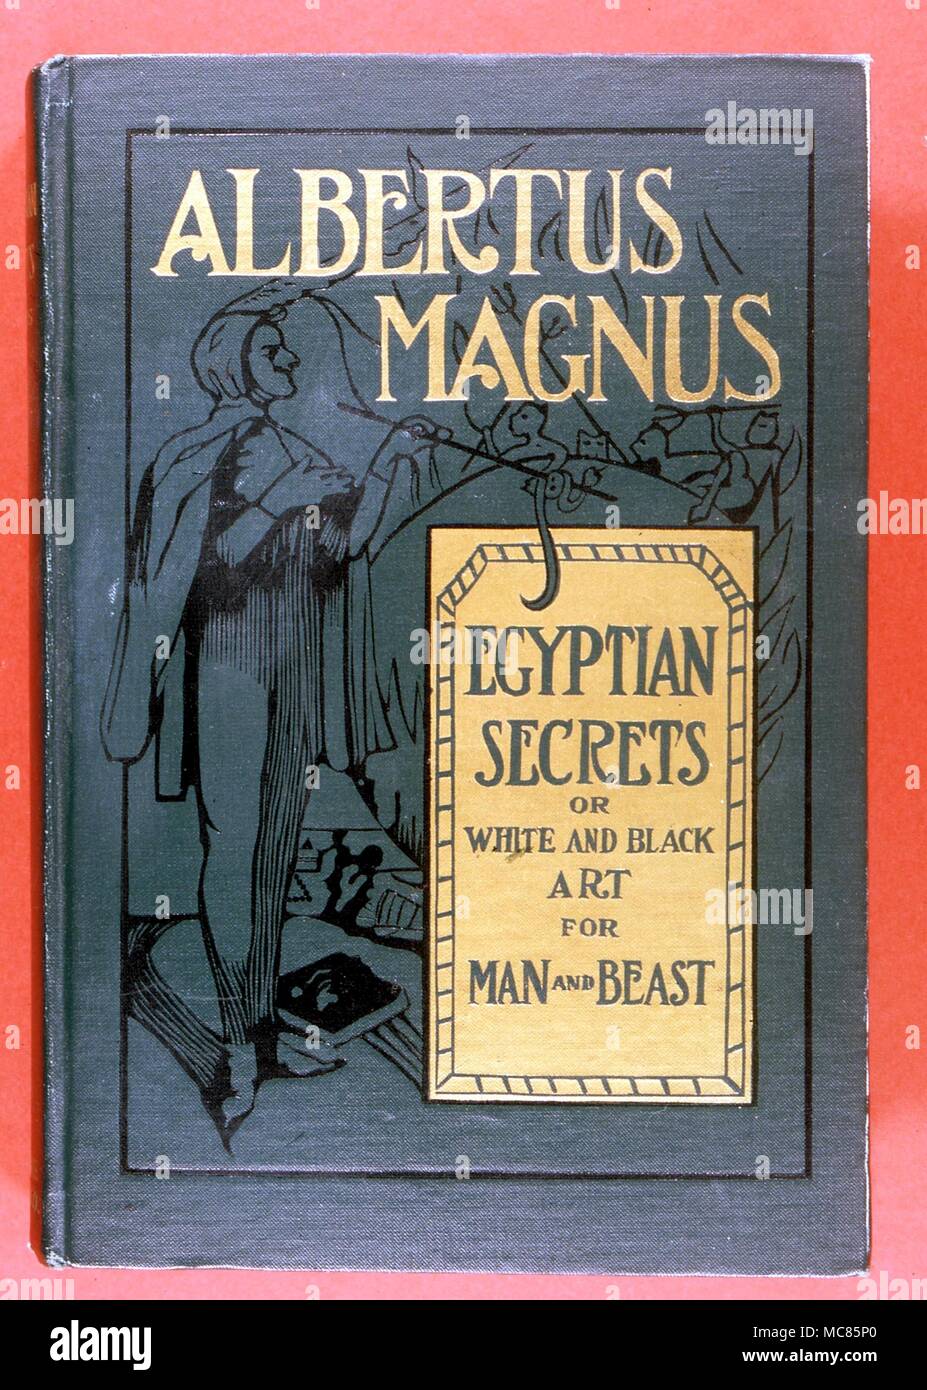 GRIMOIRE Egyptian secrets Grimoire text in book form - the pseudo-Albertian 'Egyptian Secrets - or 'White and Black Art for Man and Beast' by Albertus Magnus, 1912, Binding and blocking Stock Photo